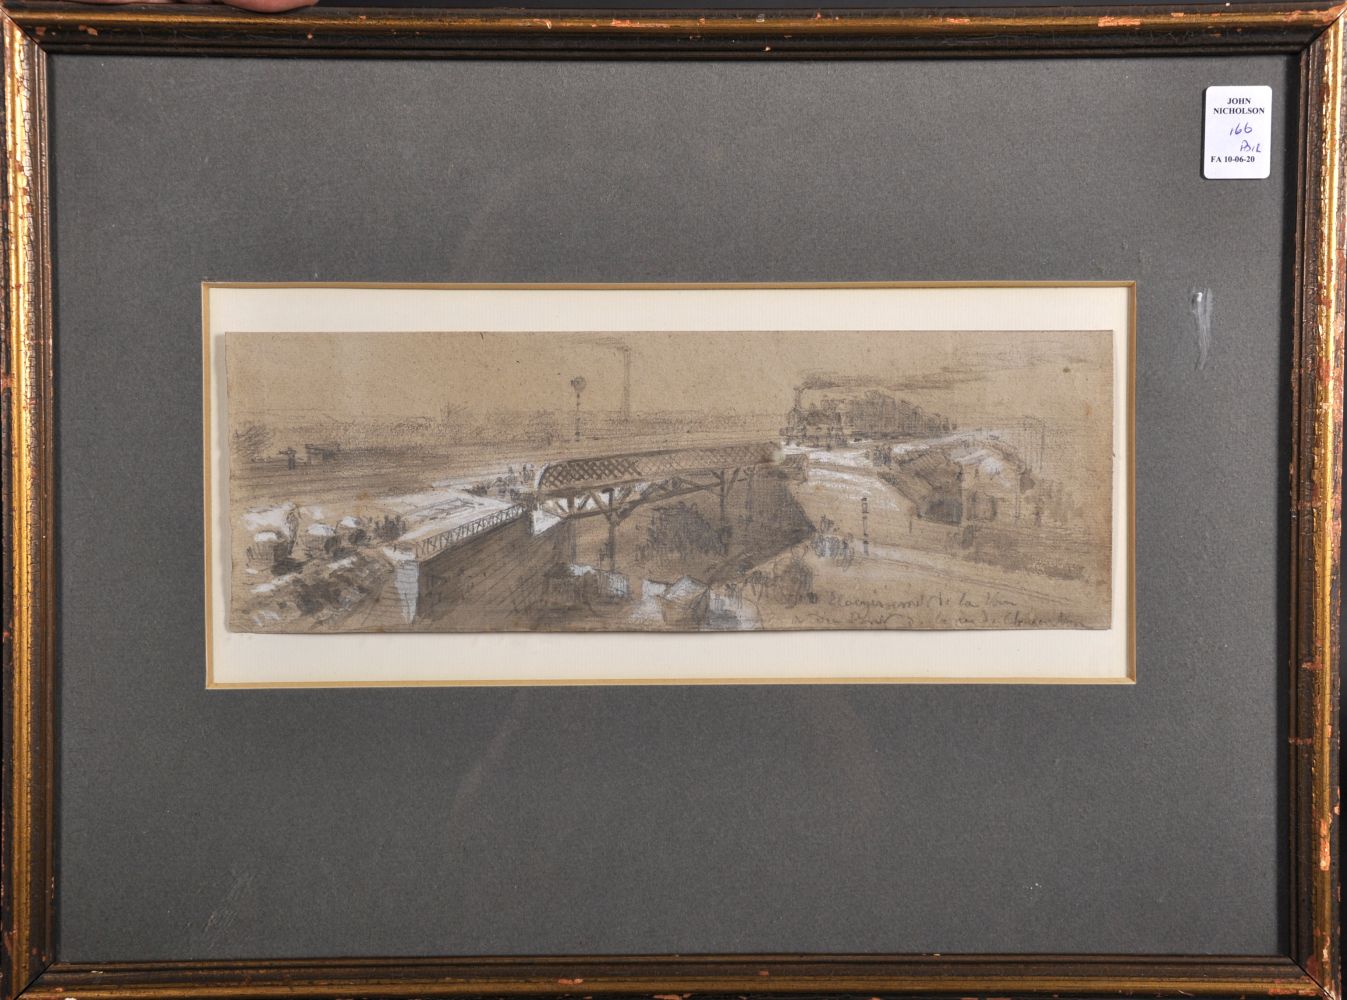 19th Century French School. "Nouvelle Gare de Marchandise, Reuilly, XII e", Study of a Train - Image 3 of 4